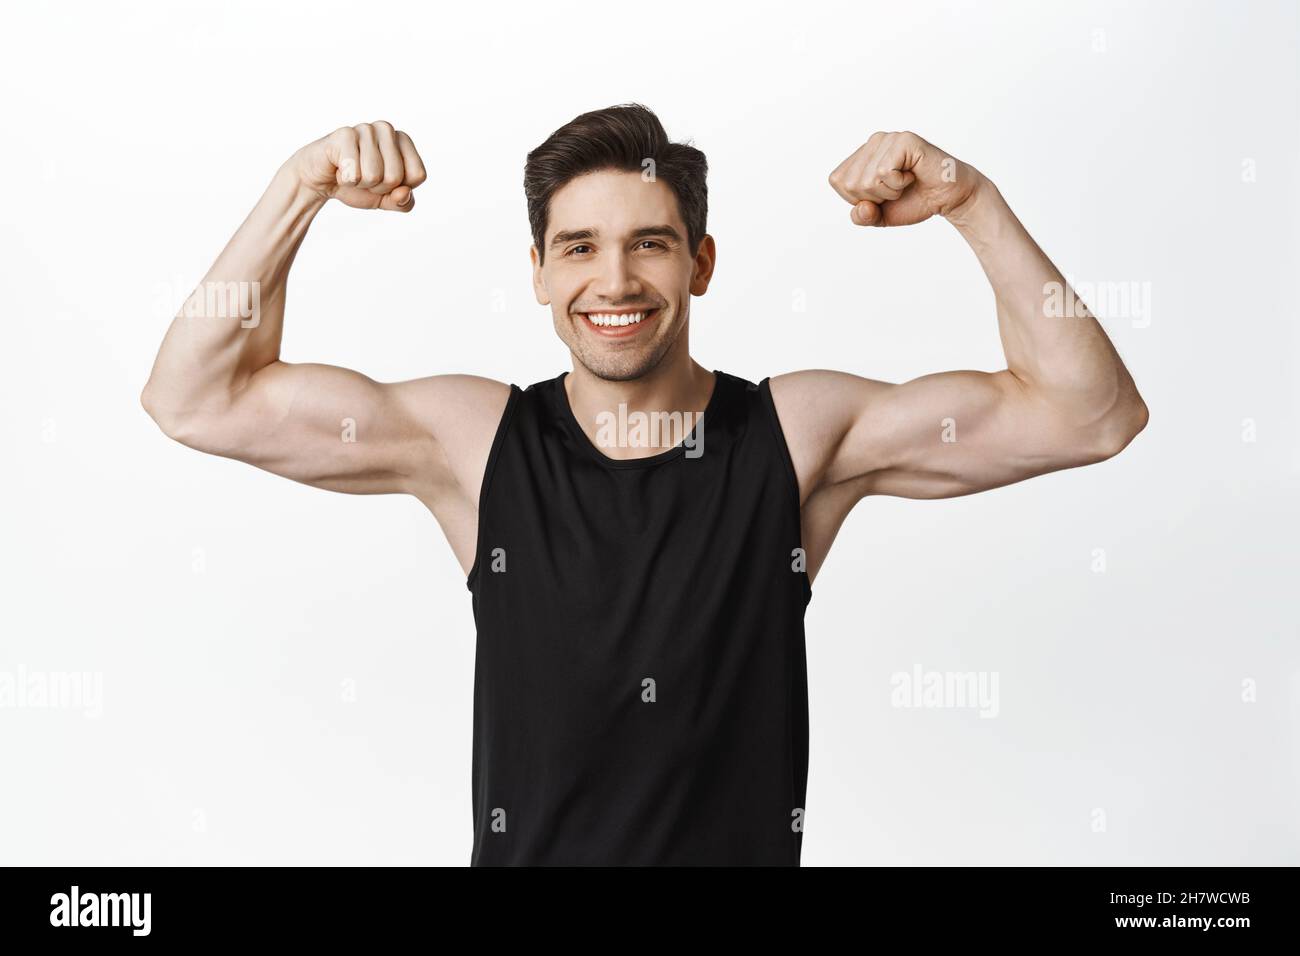 Sport And Gym Smiling Young Healthy Man Flexing Biceps Showing Strong Big Muscles And Fit Body